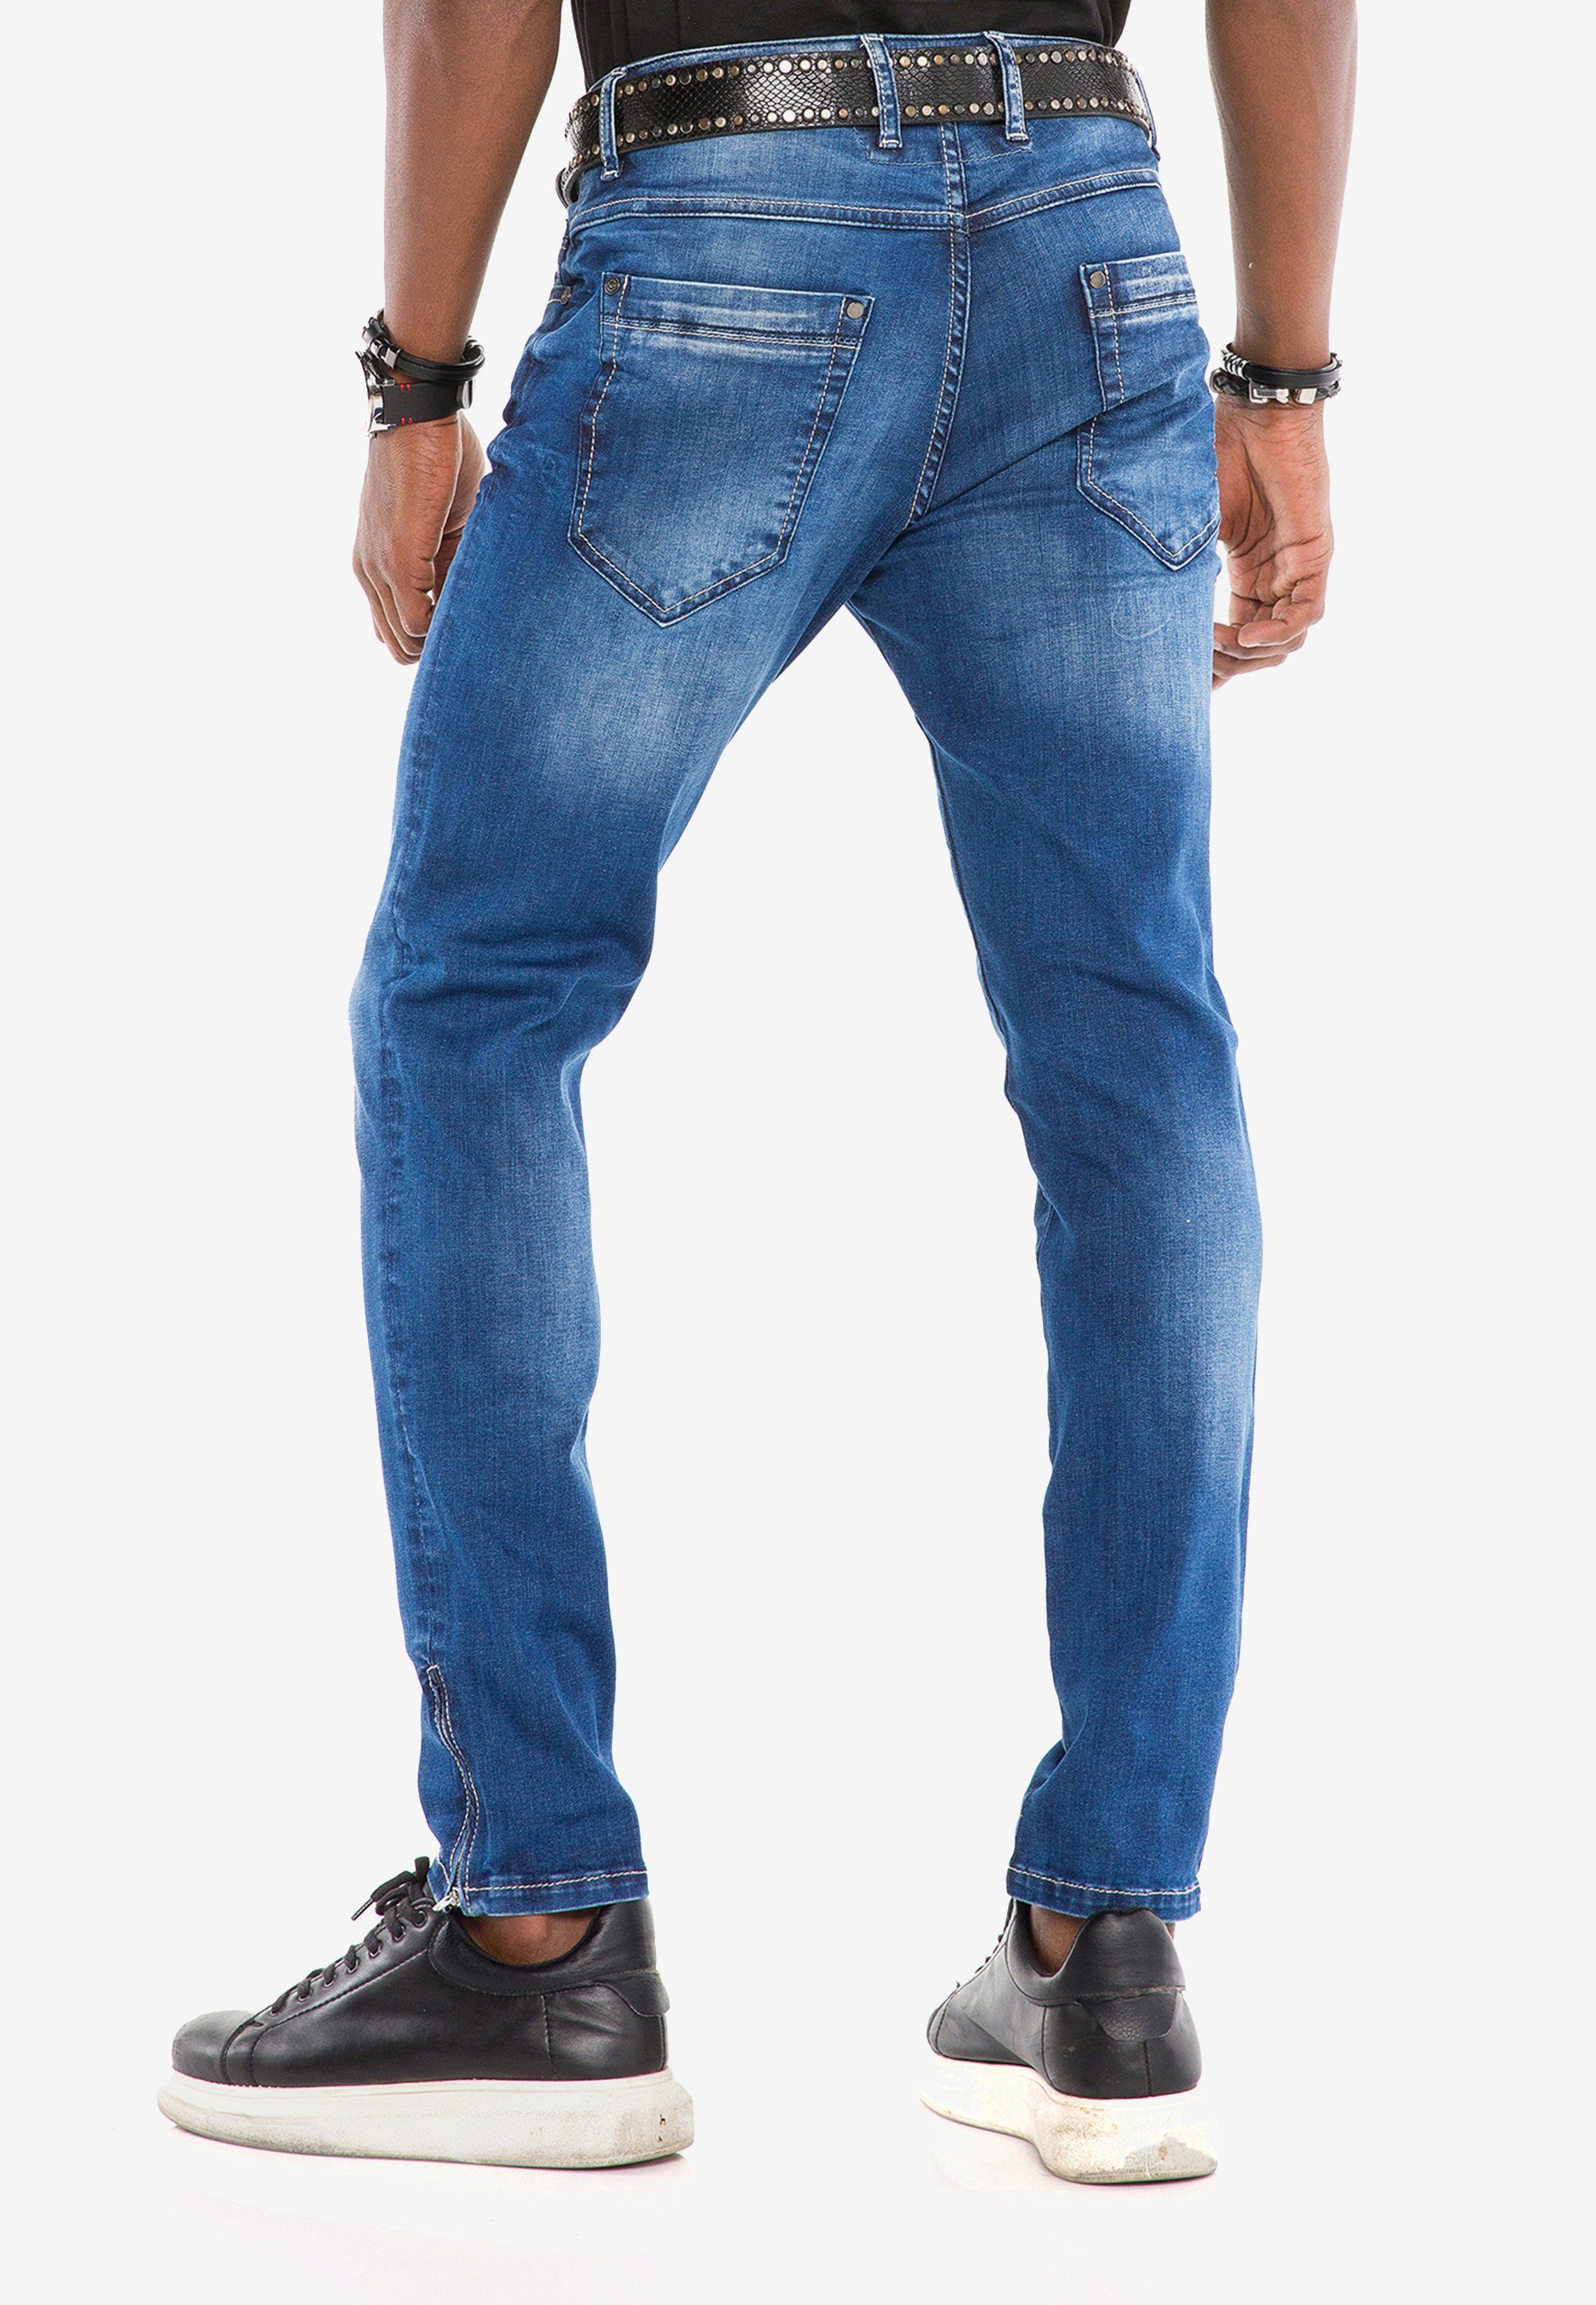 Herren Jeans Cipo & Baxx Slim-fit-Jeans mit cooler Waschung in Straight Fit